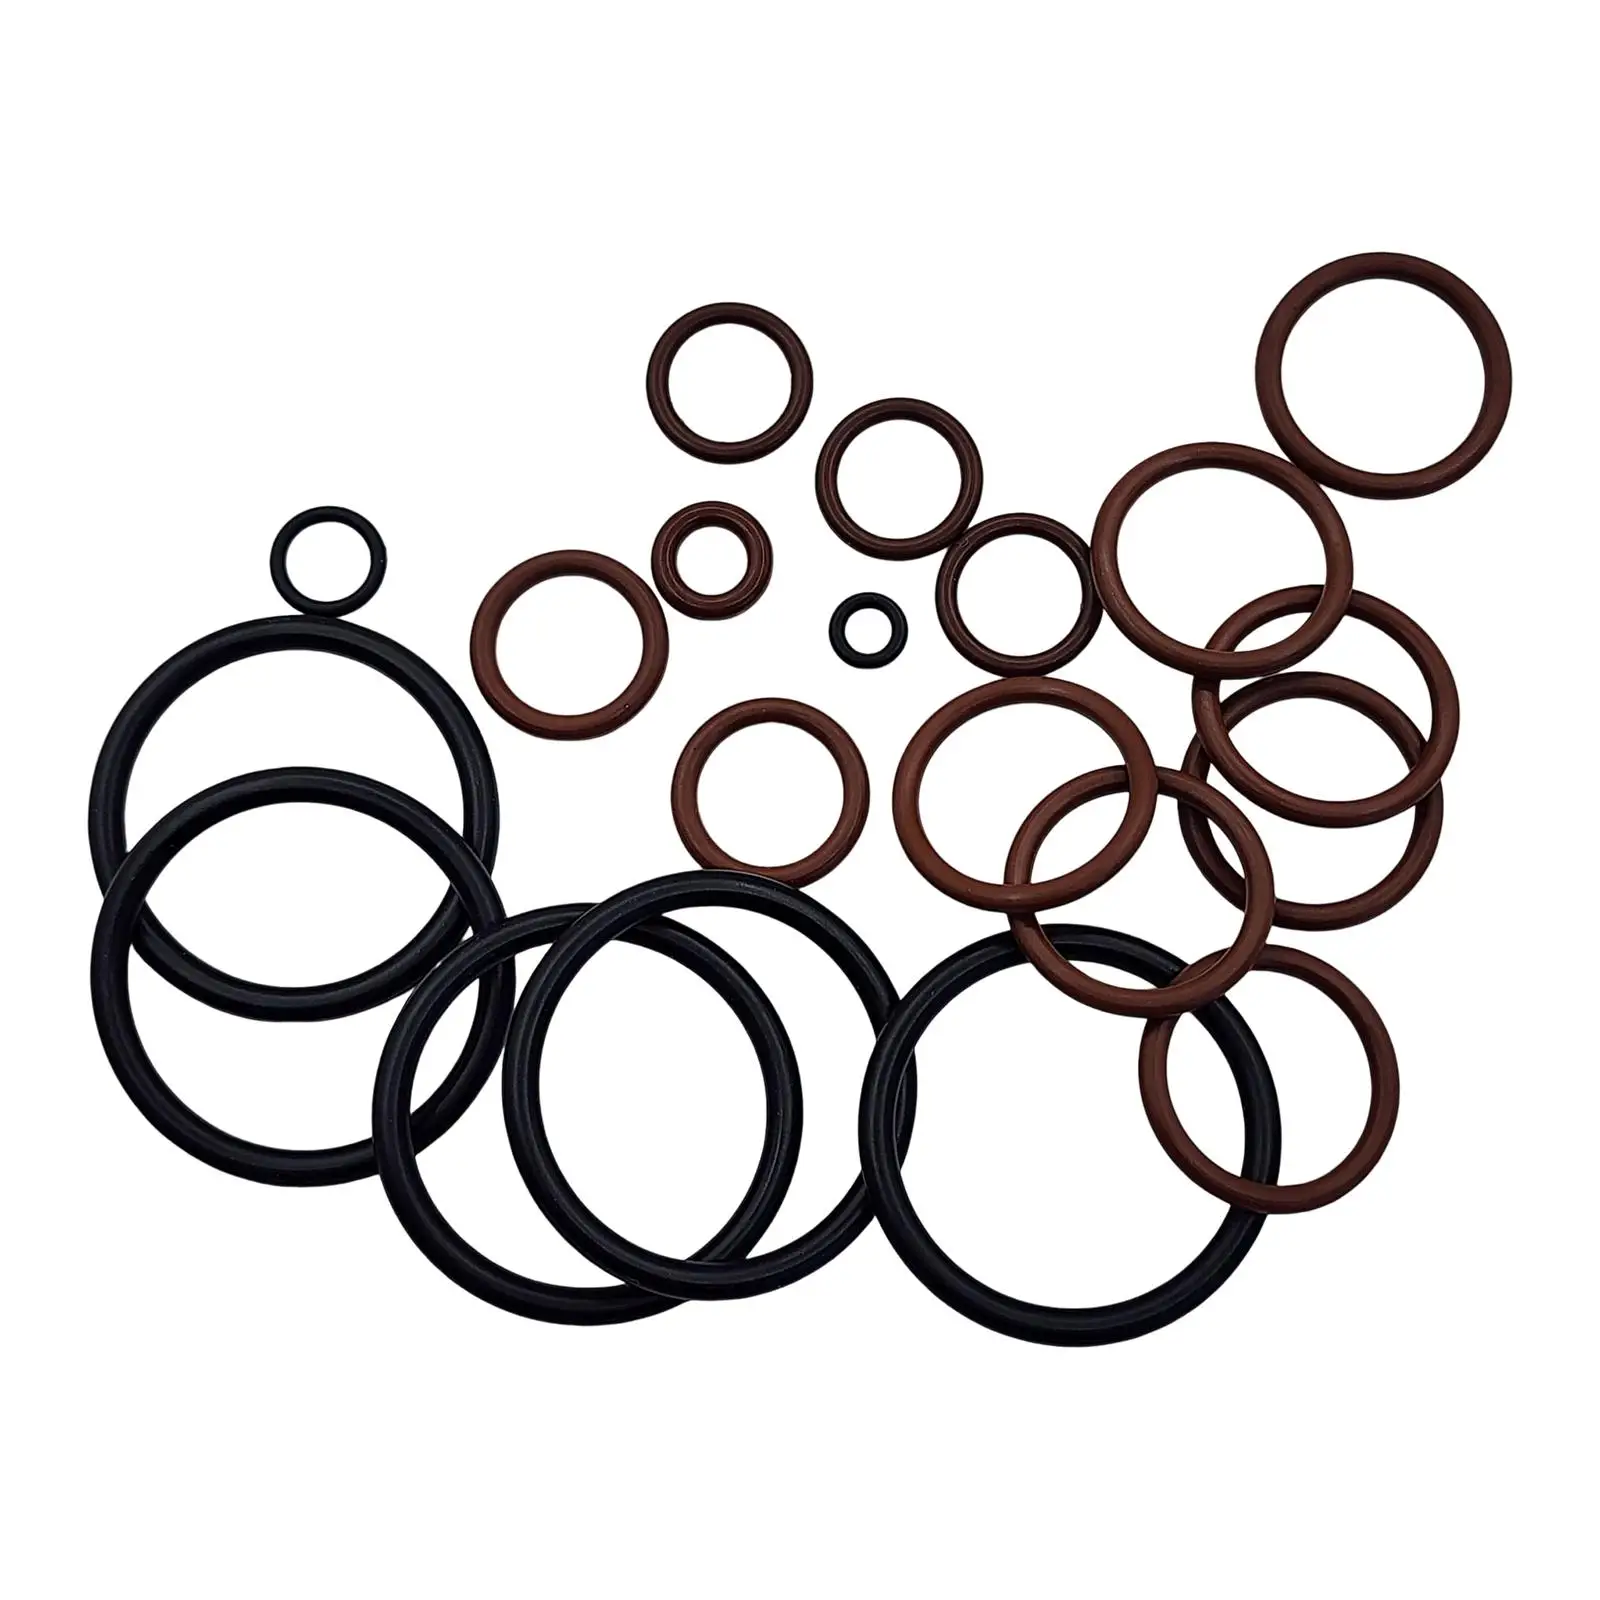 Cooling System  Kit Direct Replaces Durable Ring Assortment Kit Professional Accessory for E46 M52 M54 Automotive Hose